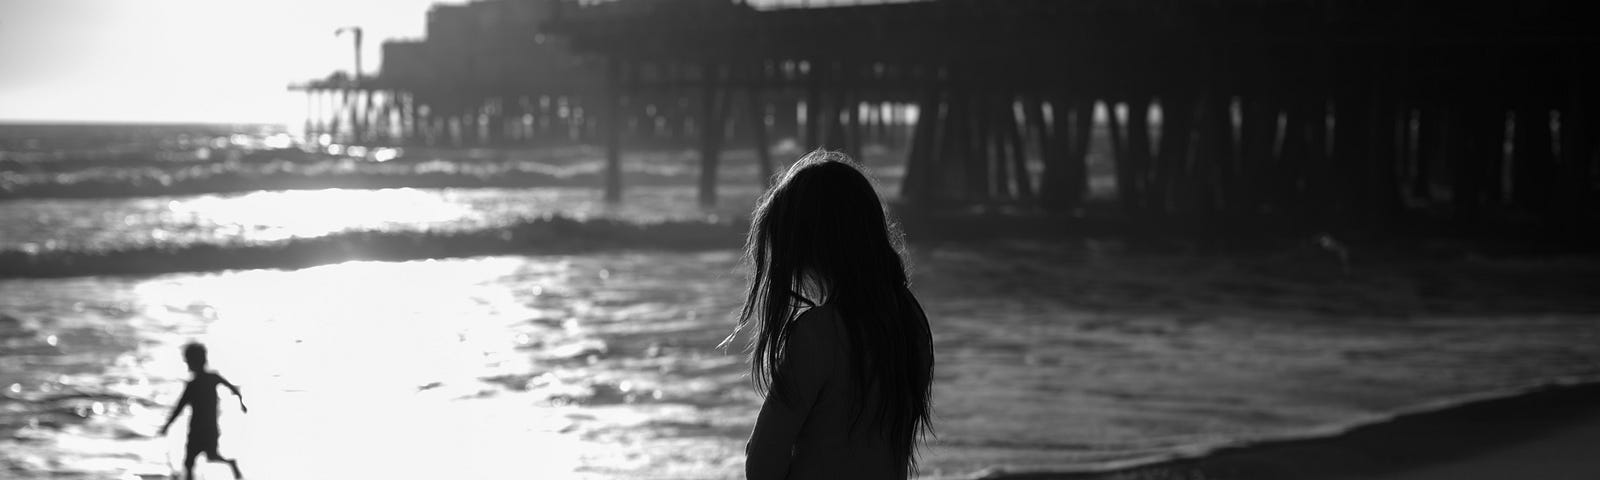 A grayscale image of a woman standing on the shore at the beach. There is also a  silhouette of a child playing in the water.